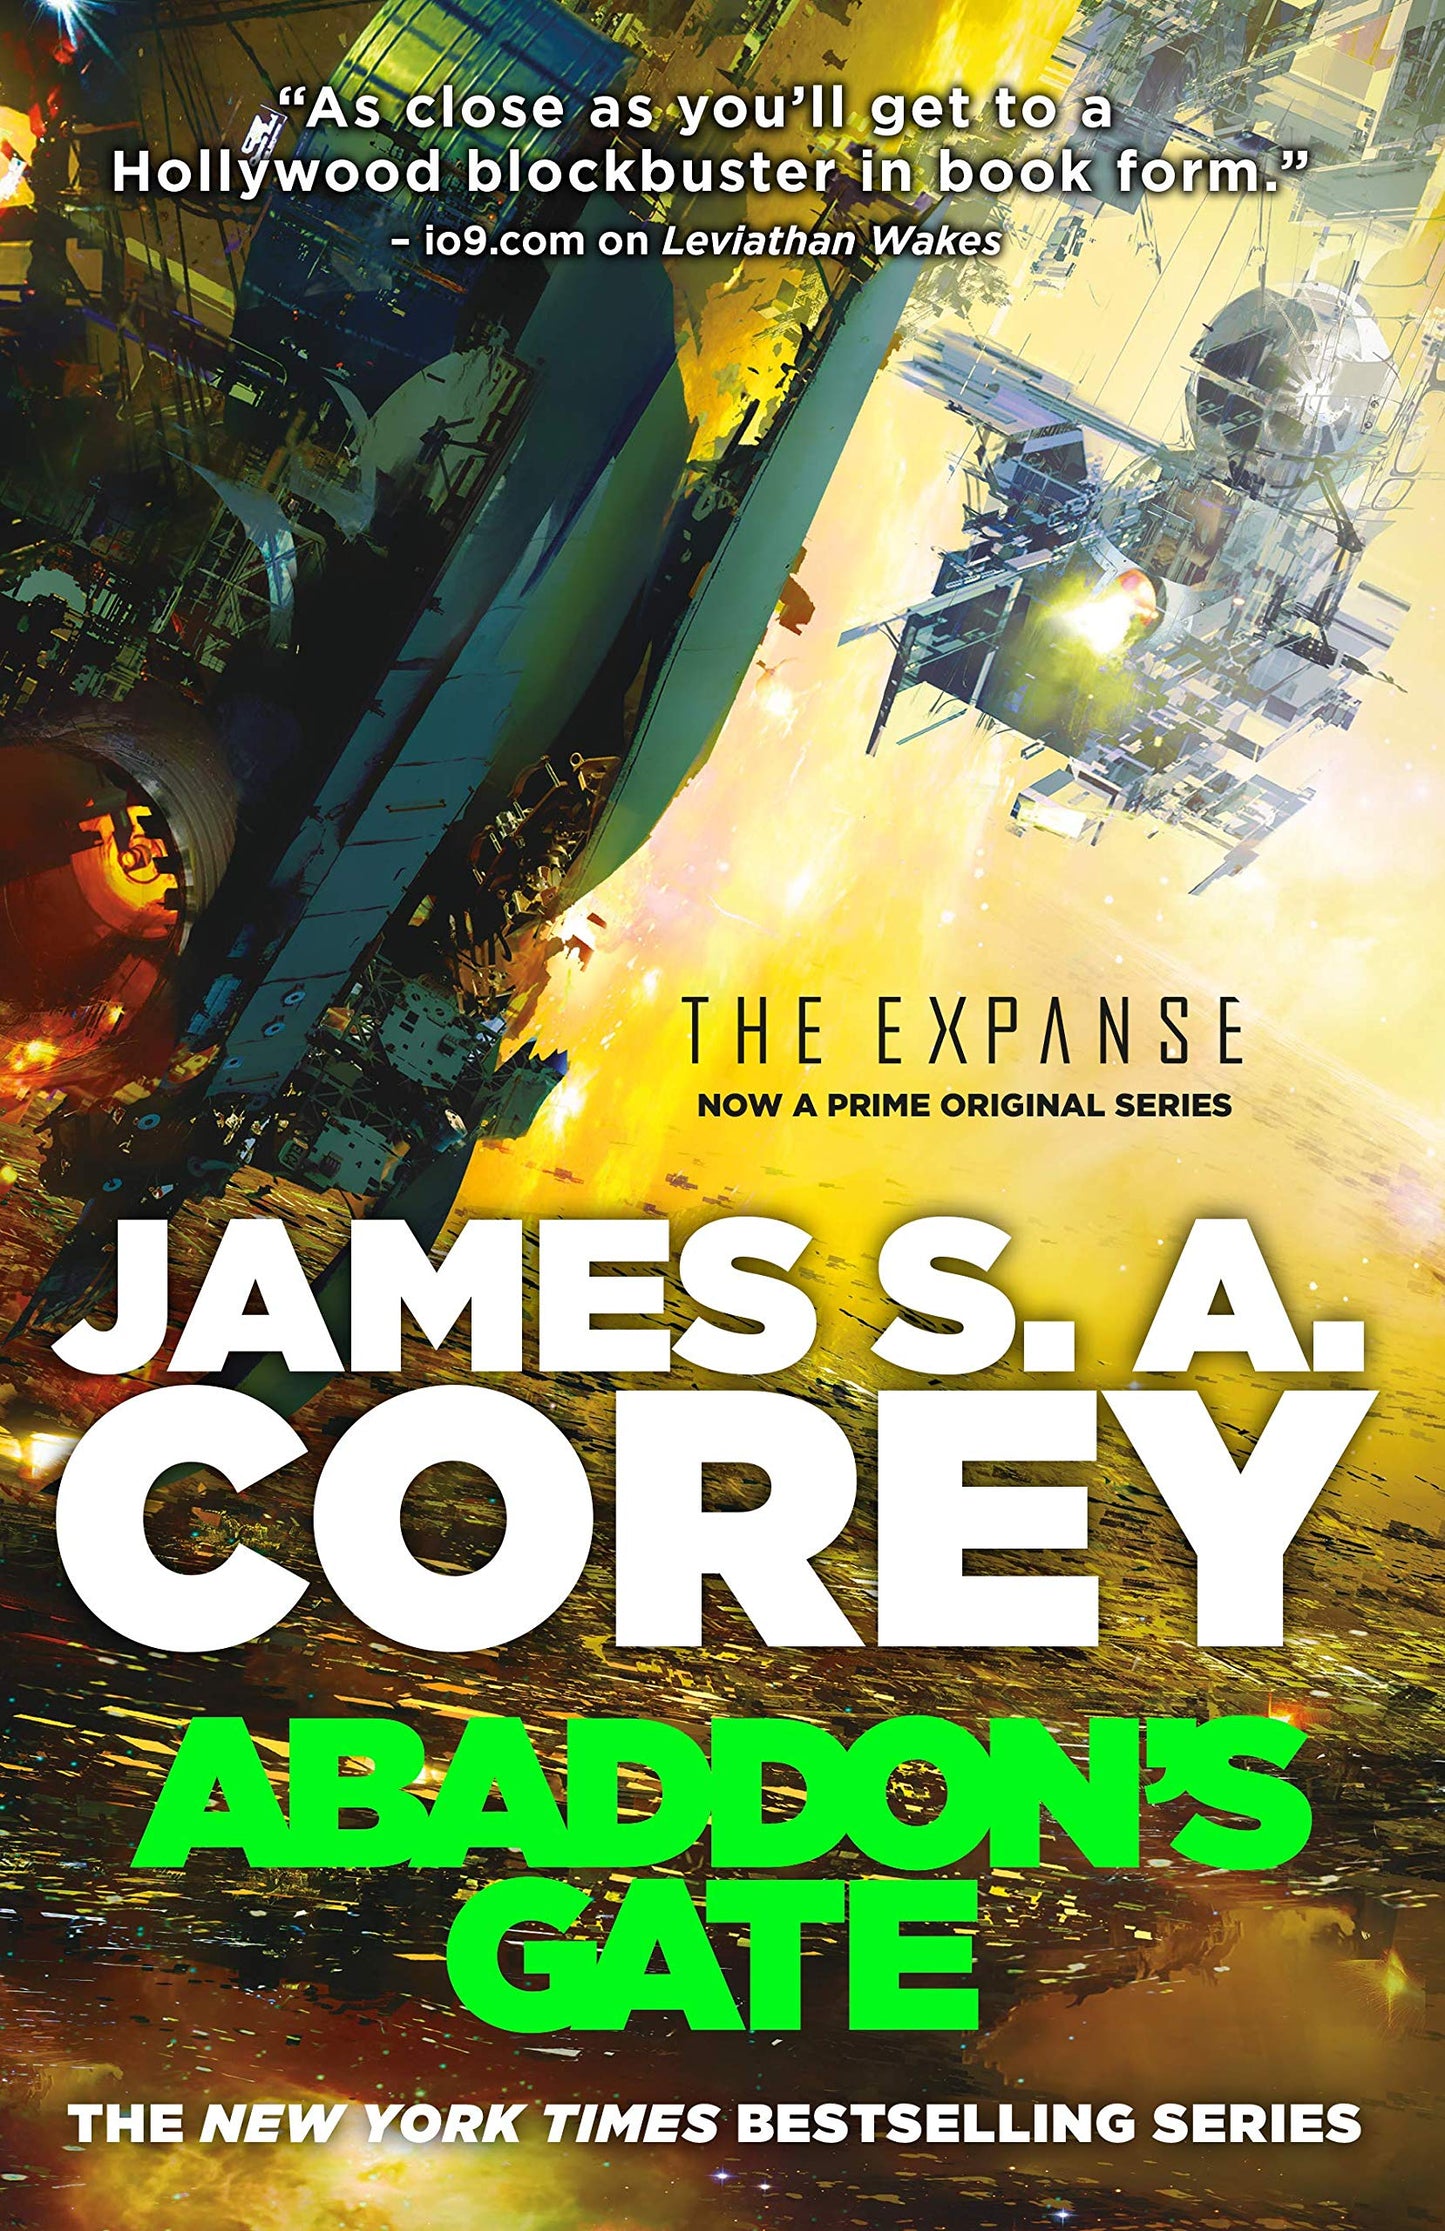 Abaddon's Gate: The Expanse Book 3